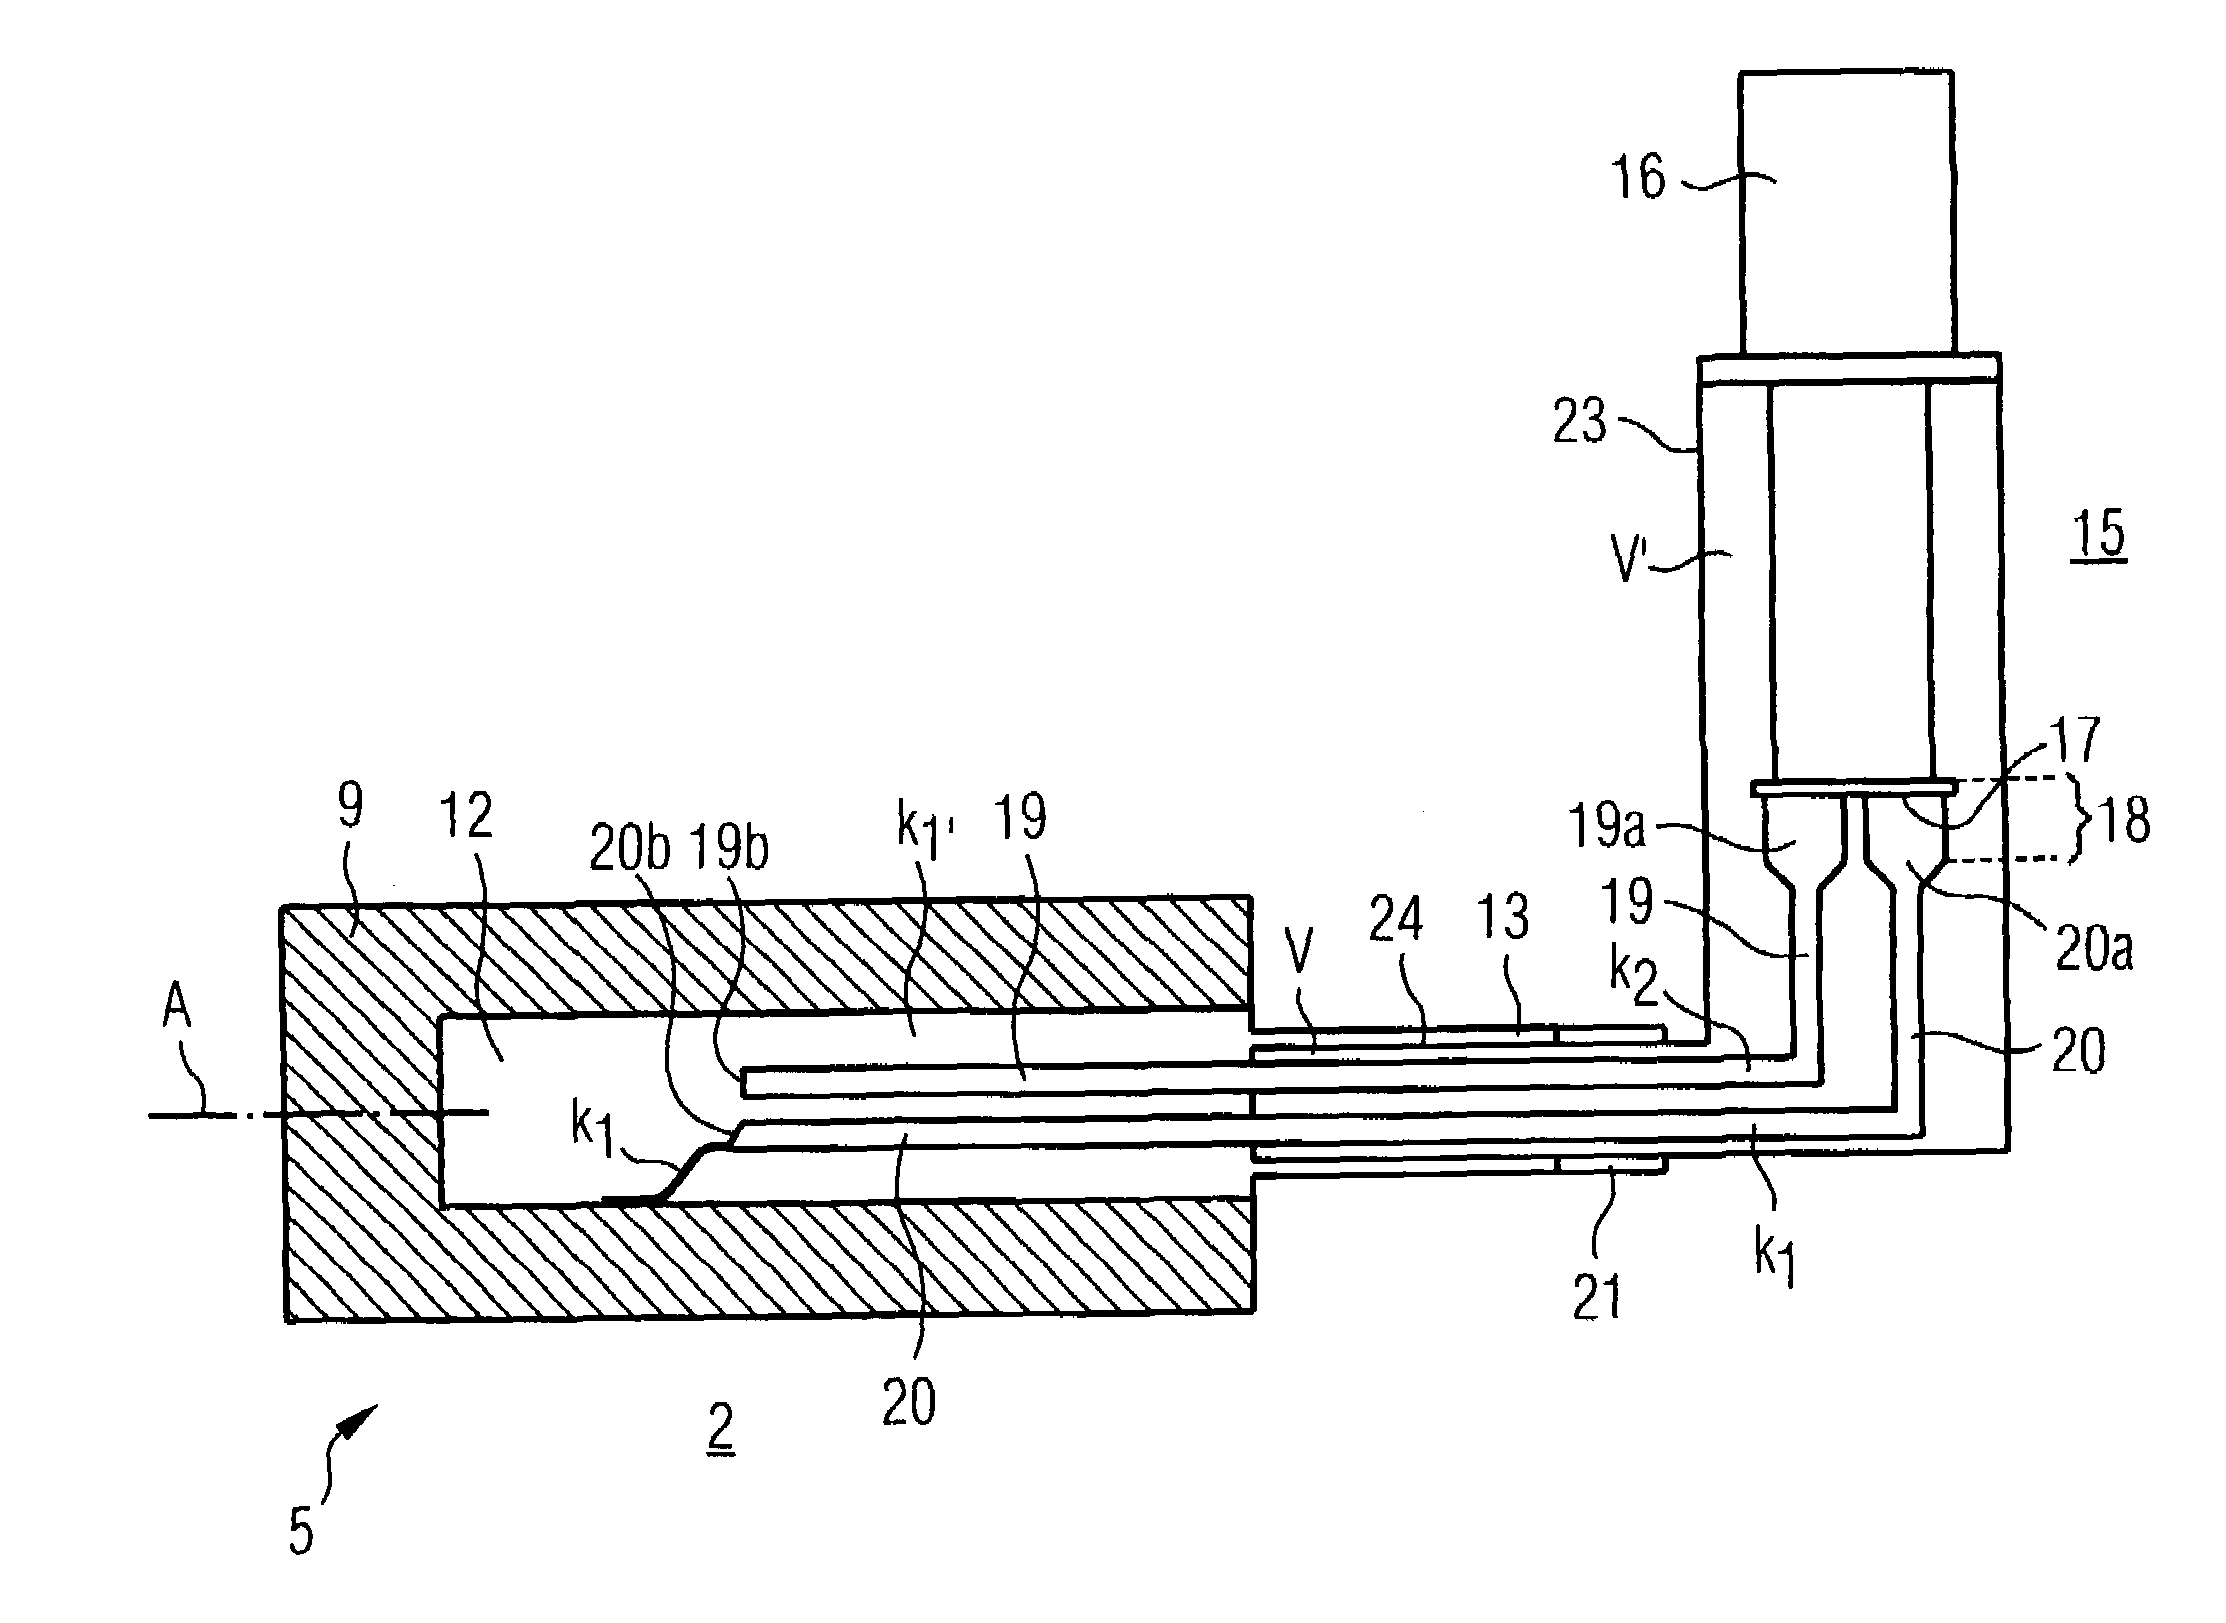 Superconductive device comprising a refrigeration unit, equipped with a refrigeration head that is thermally coupled to a rotating superconductive winding